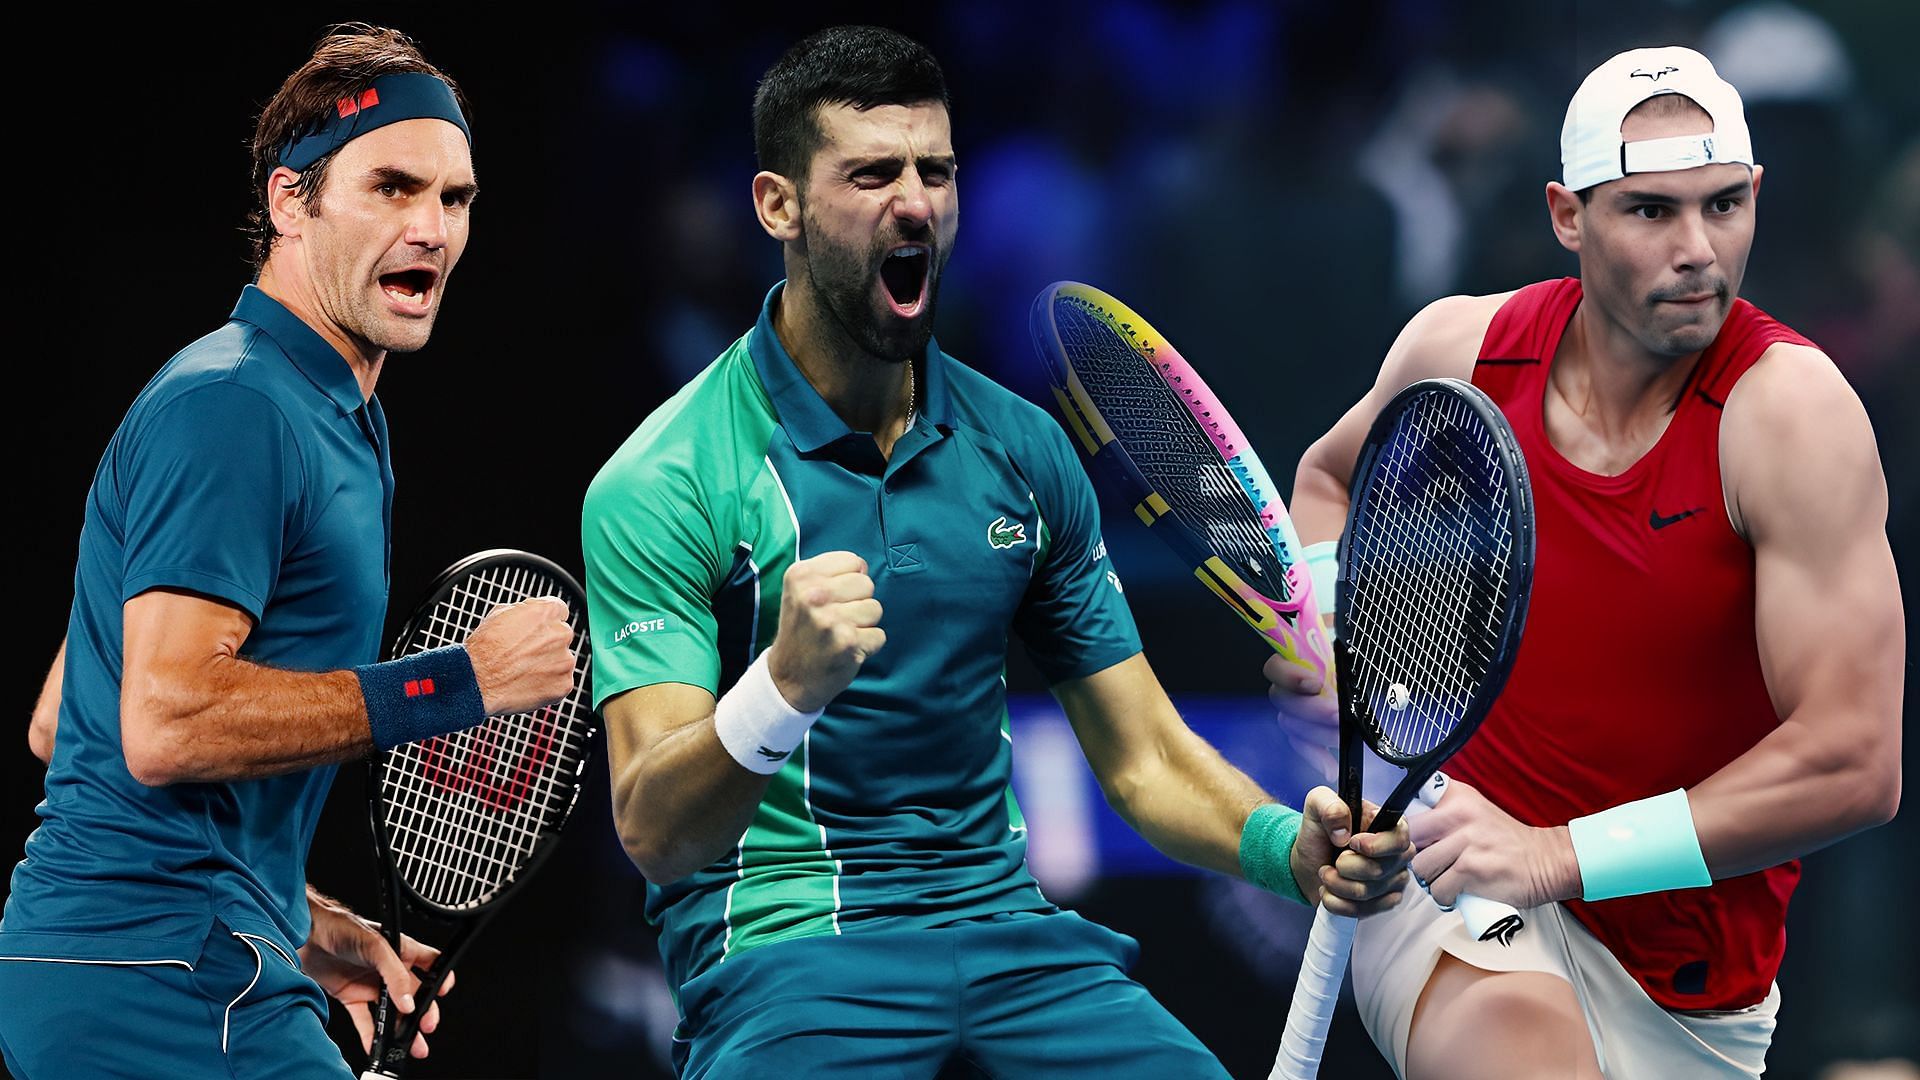 The Big Three have revolutionized tennis during the last two decades